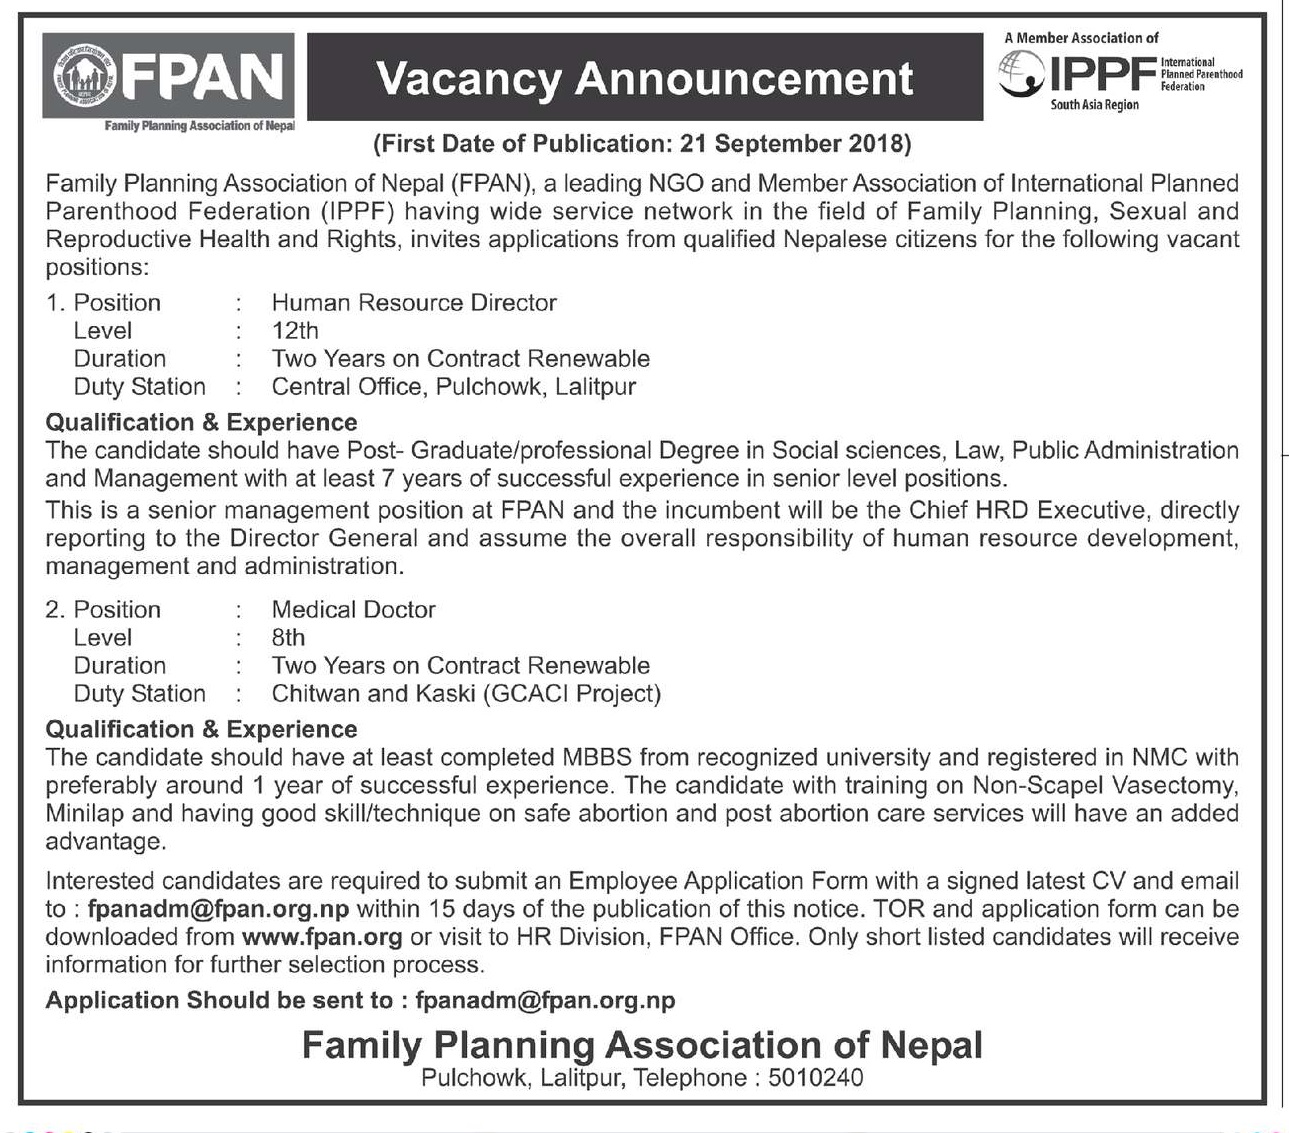 Family Planning Association of Nepal (FPAN)